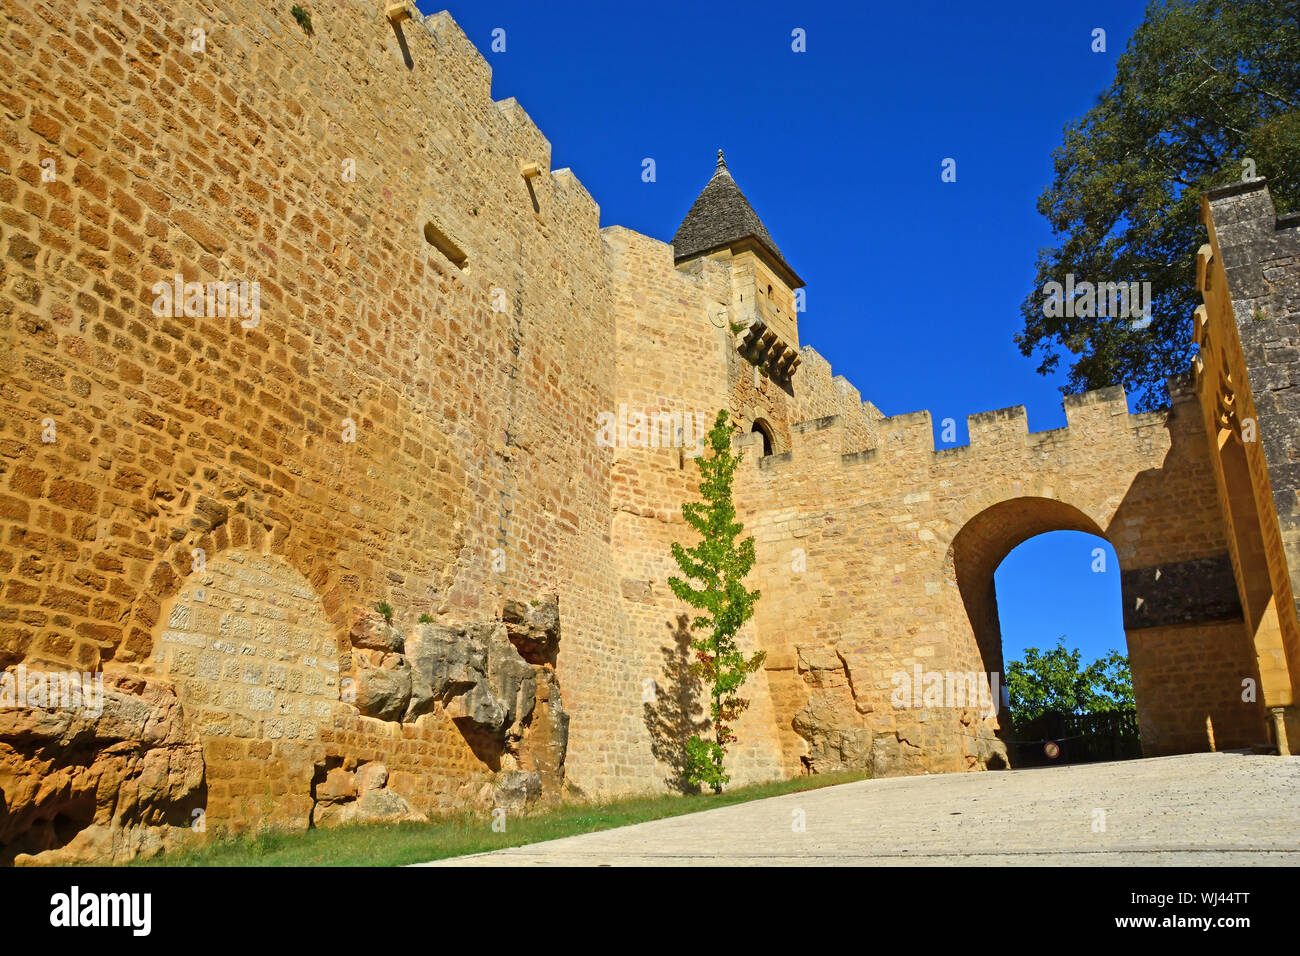 Entrance to the old, fortified Chateau Montfort on the Dordogne River in France Stock Photo